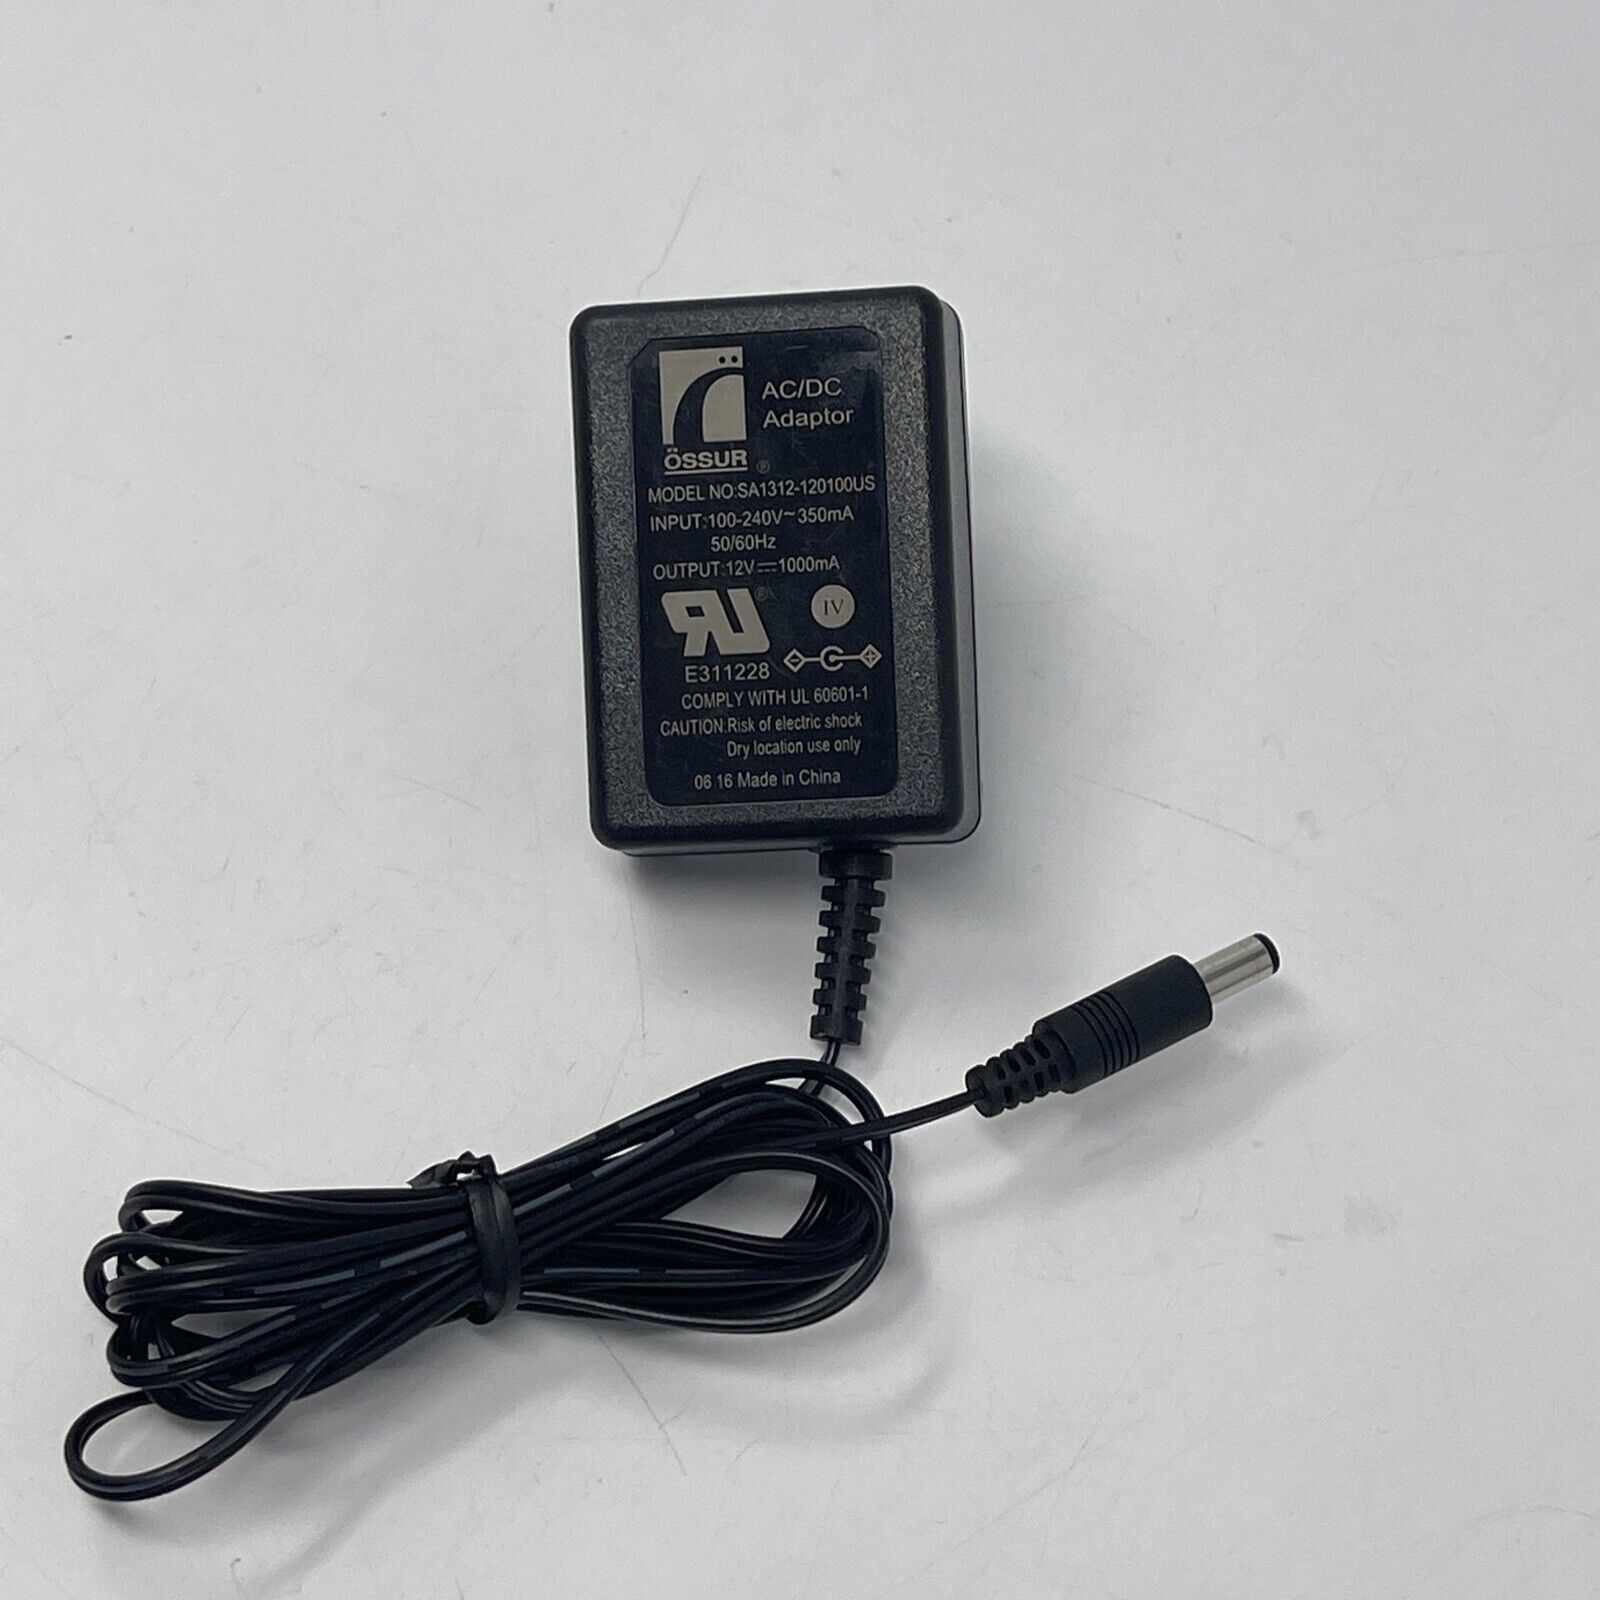 TO FIT MAKITA DMR109 SITE RADIO POWER CHARGER ADAPTER PLUG 12V AC UK Type AC/DC Adapter Connection Split/Duplication 1: